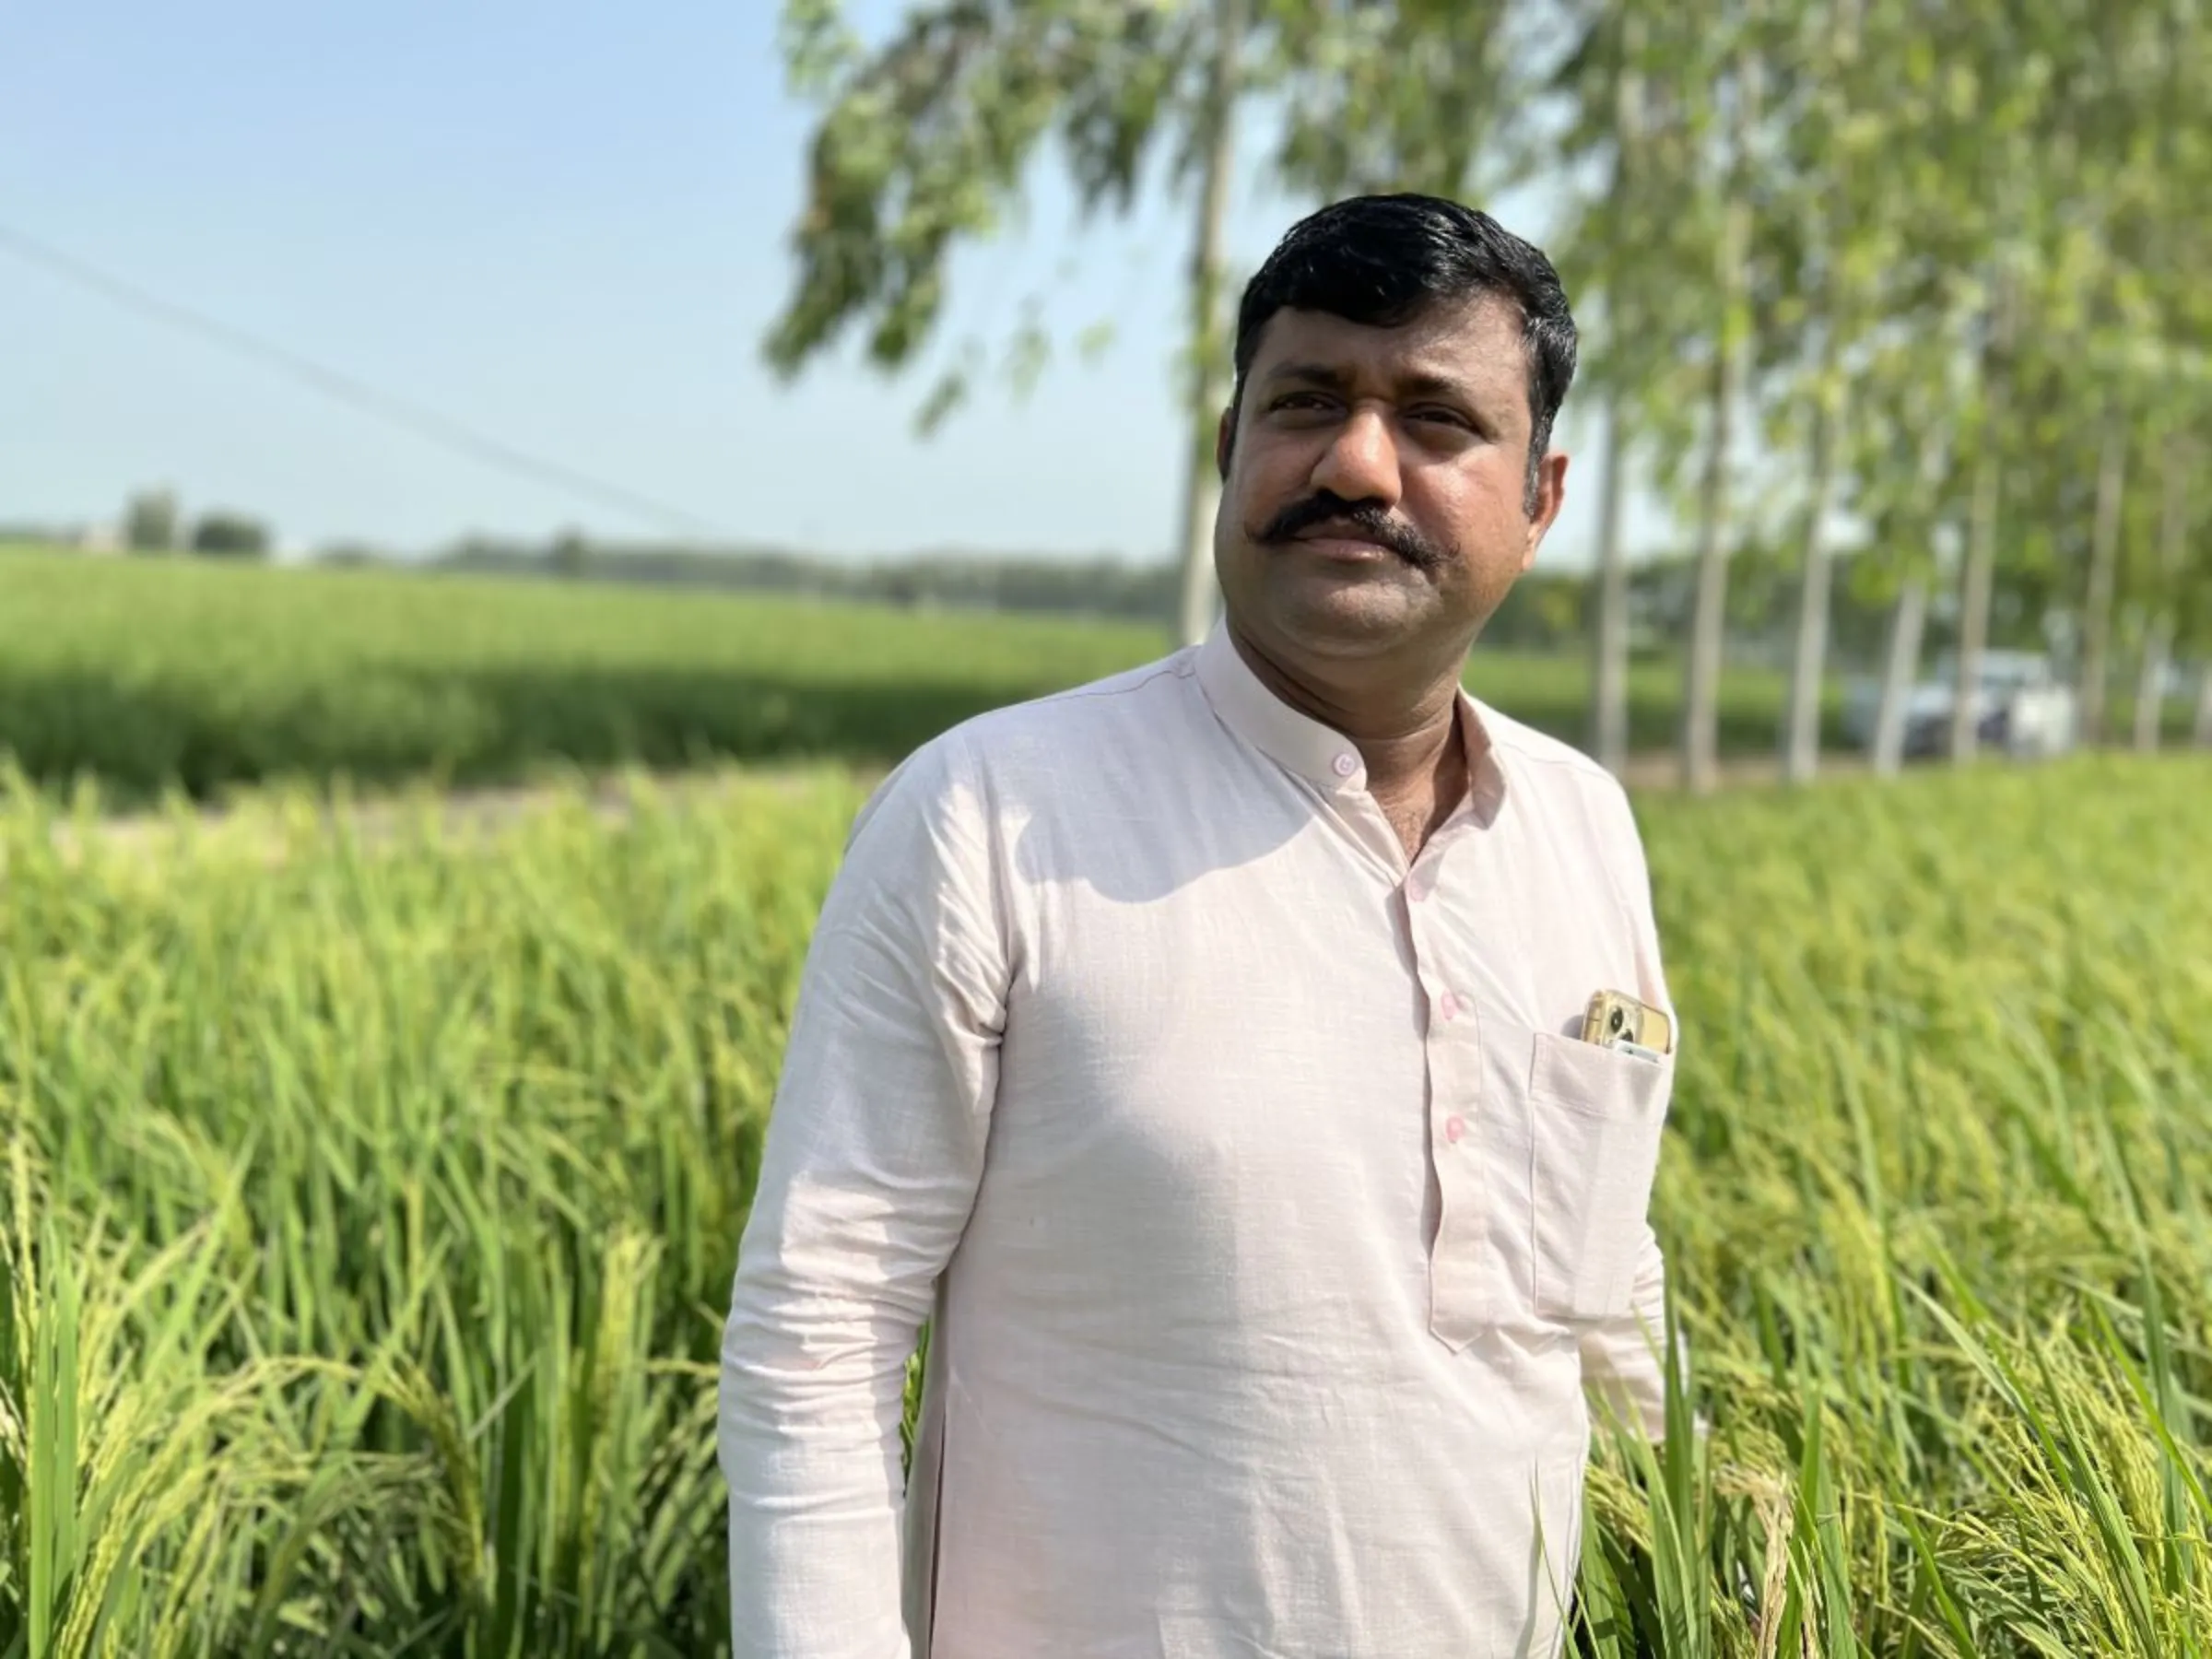 Farmer Jitendra Singh poses in a field where he is growing rice using eco-friendly practices, slashing methane emissions and generating carbon credits, in Karnal district, Haryana state, India, September 1, 2023. Thomson Reuters Foundation/Bhasker Tripathi